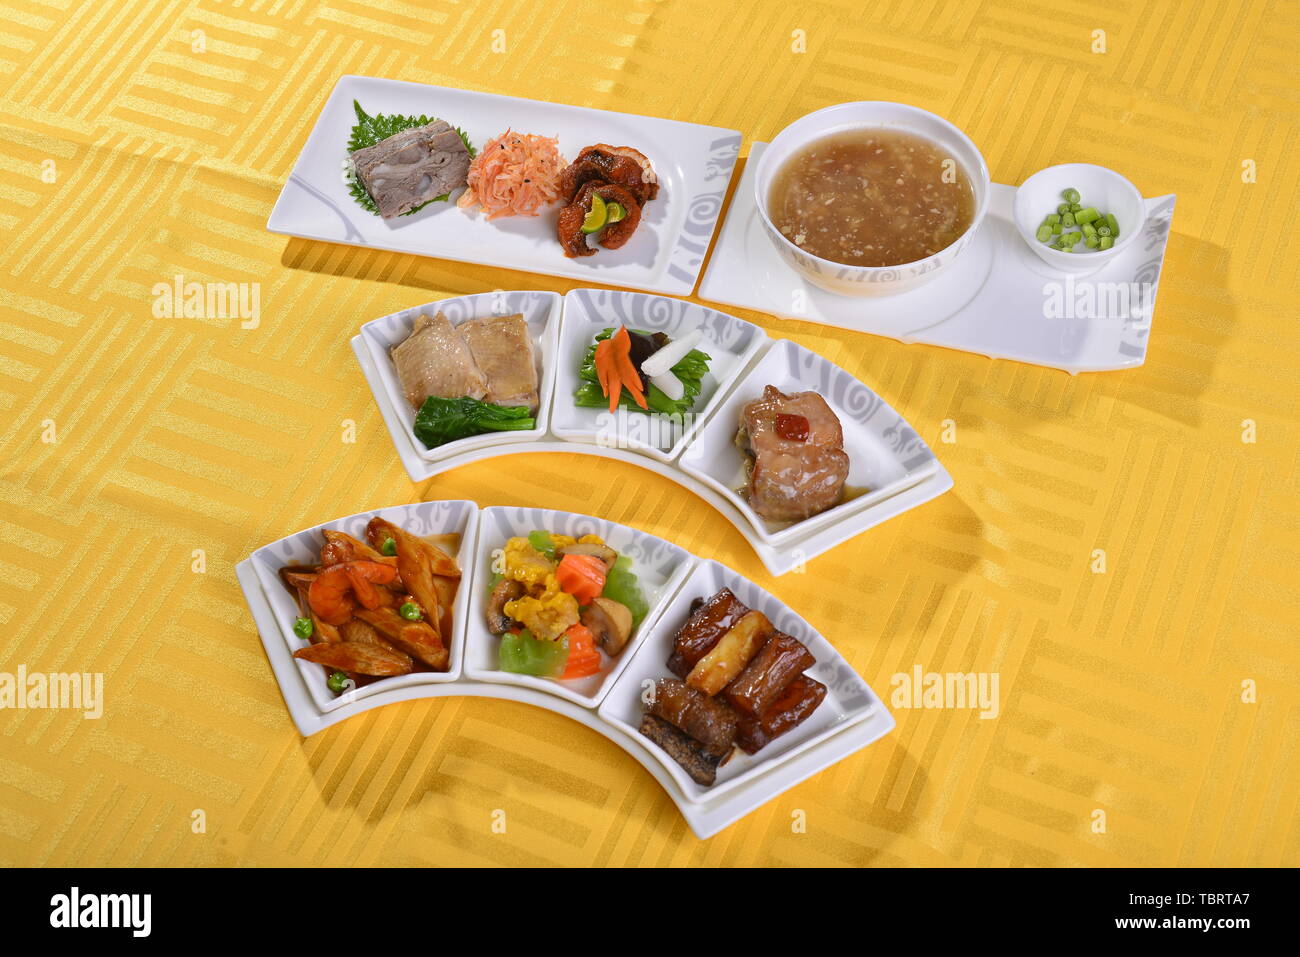 Food bowls chicken meals healthy. No one cooks delicious lunch. Dinner board with nutrients, vegetables, refreshments. Diet. Wooden noodles delicious background background traditional meat hot sauce sauce with table nutrients Shaanxi cuisine hot dishes meatballs fried meat specialty dishes local cuisine Stock Photo